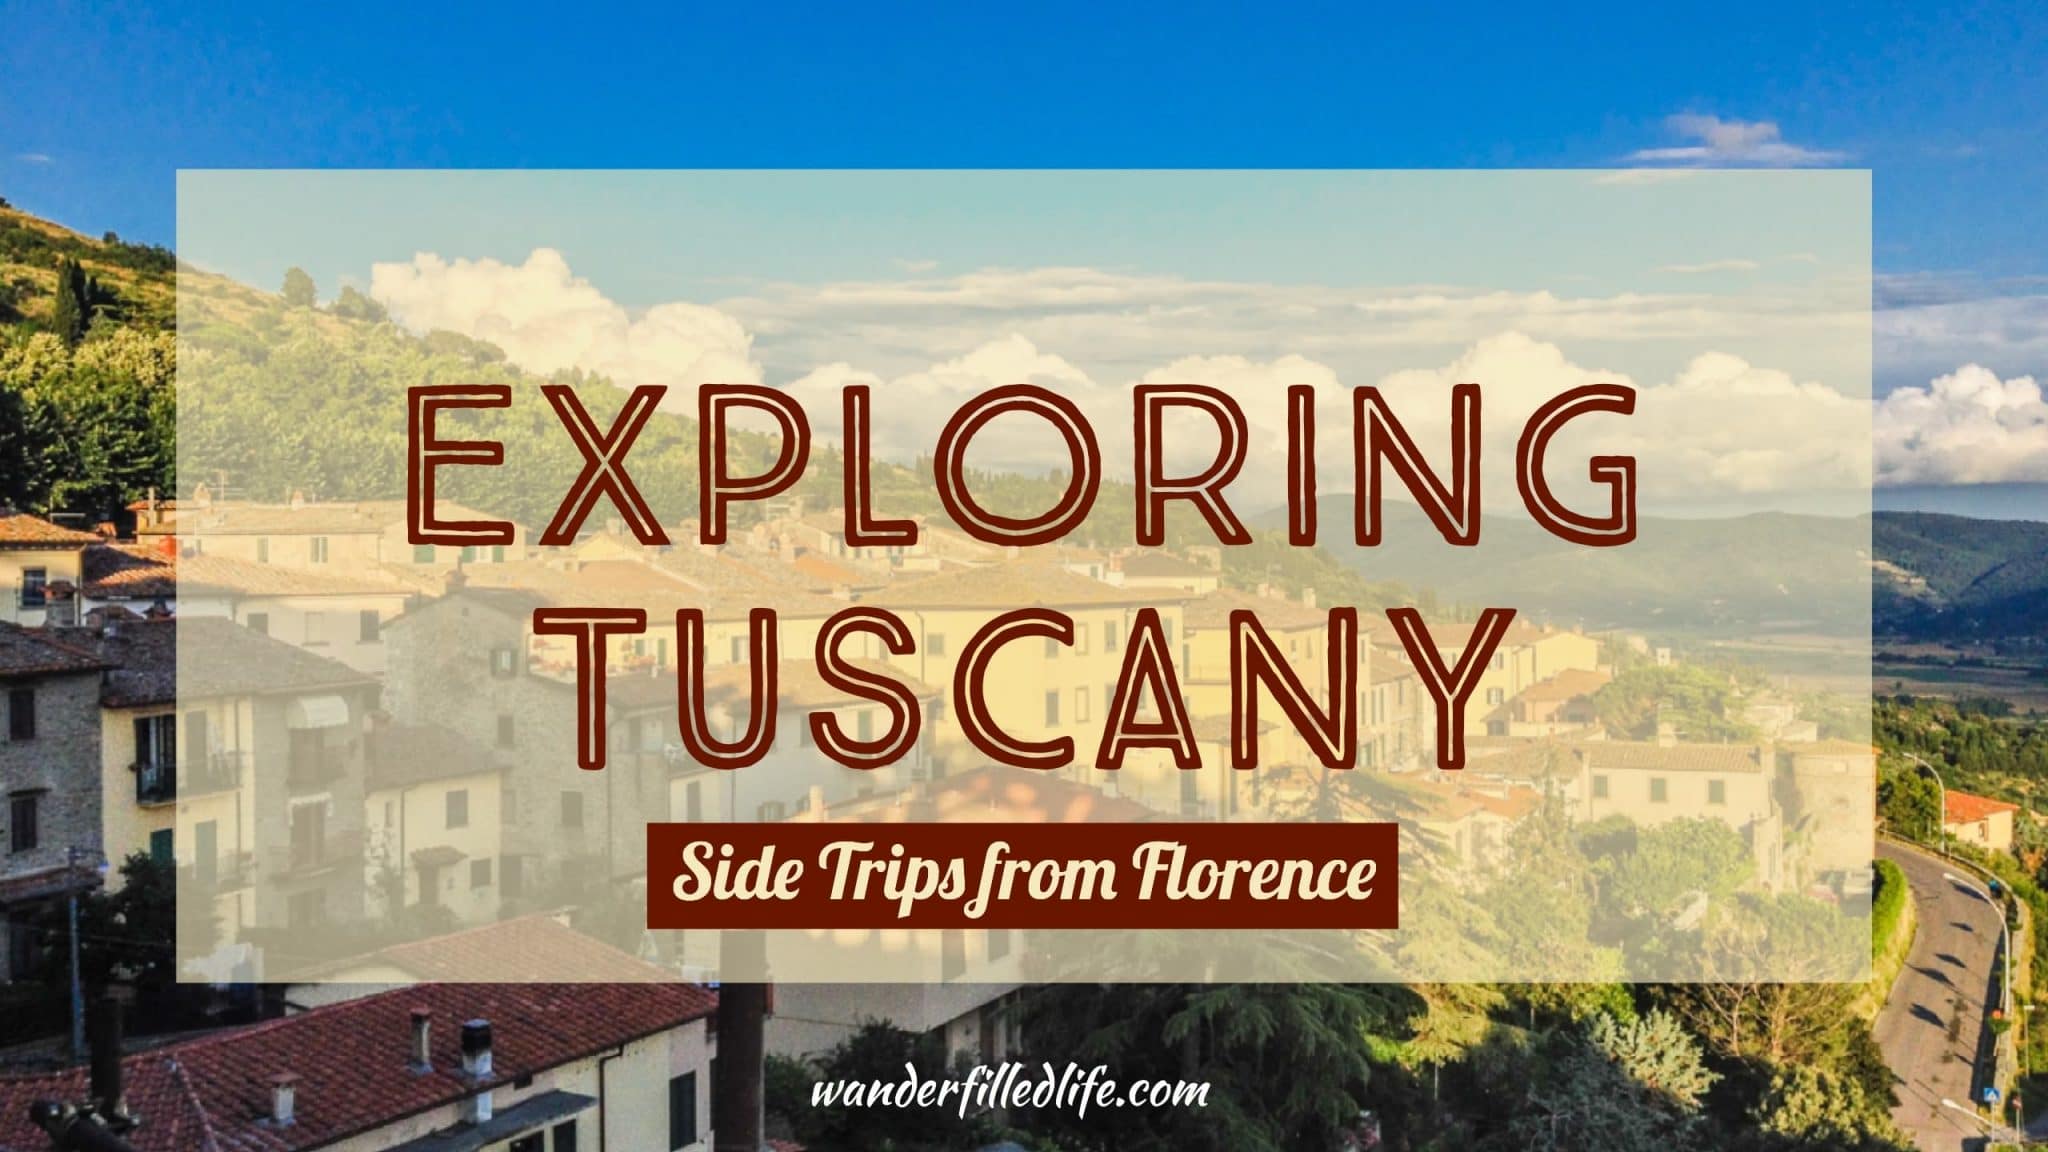 Exploring Tuscany - Side Trips from Florence